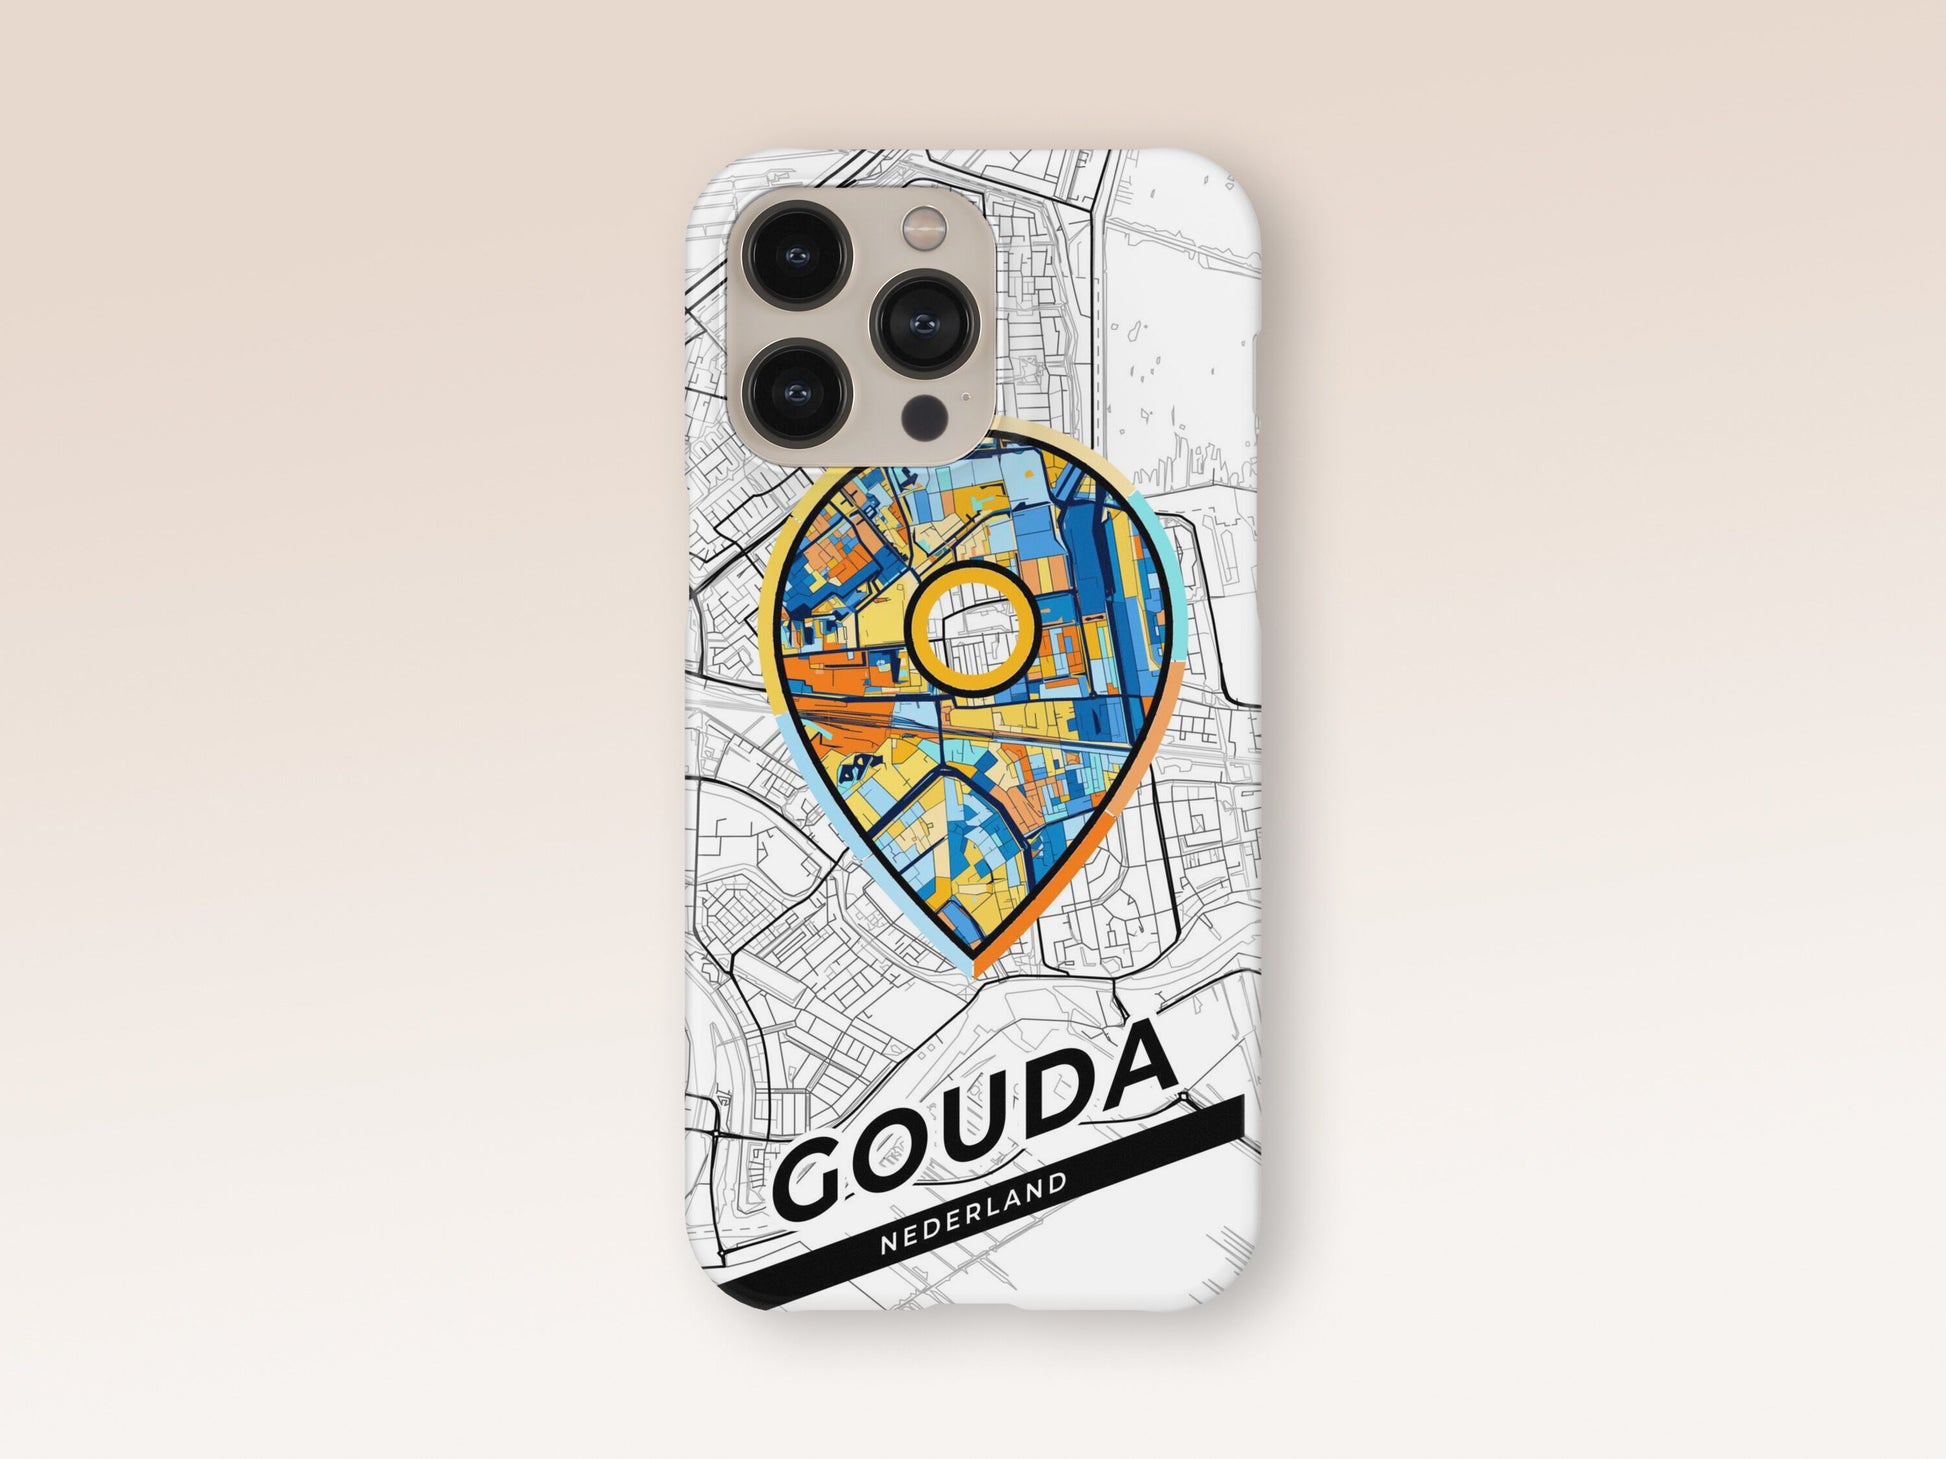 Gouda Netherlands slim phone case with colorful icon. Birthday, wedding or housewarming gift. Couple match cases. 1